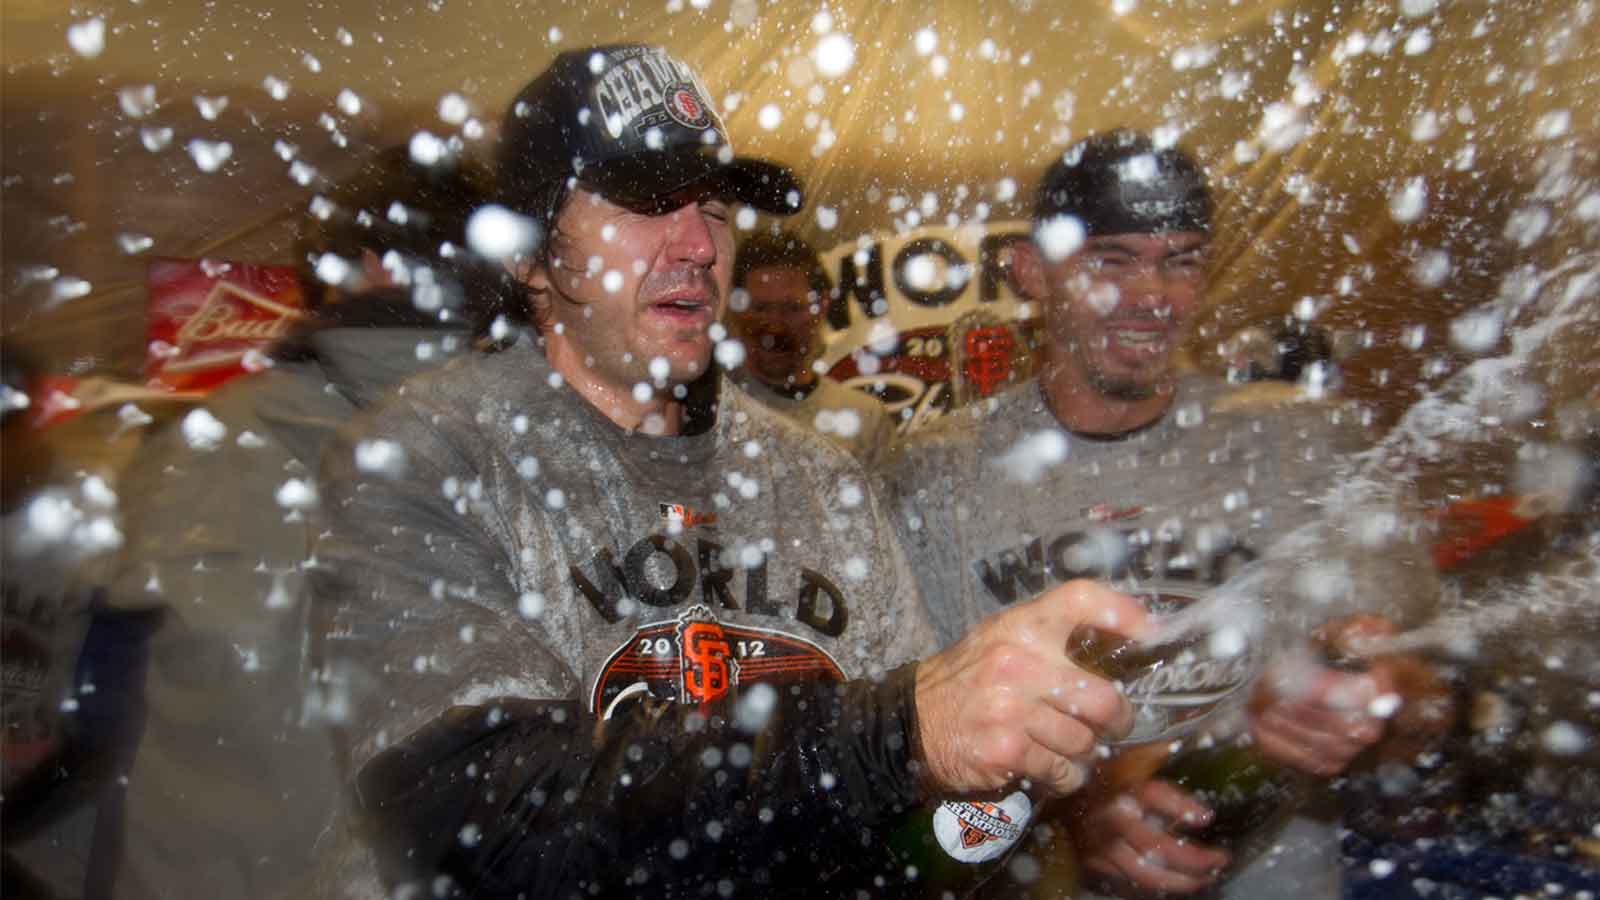 Barry Zito's 'surreal' Giants 2012 World Series moment after '10